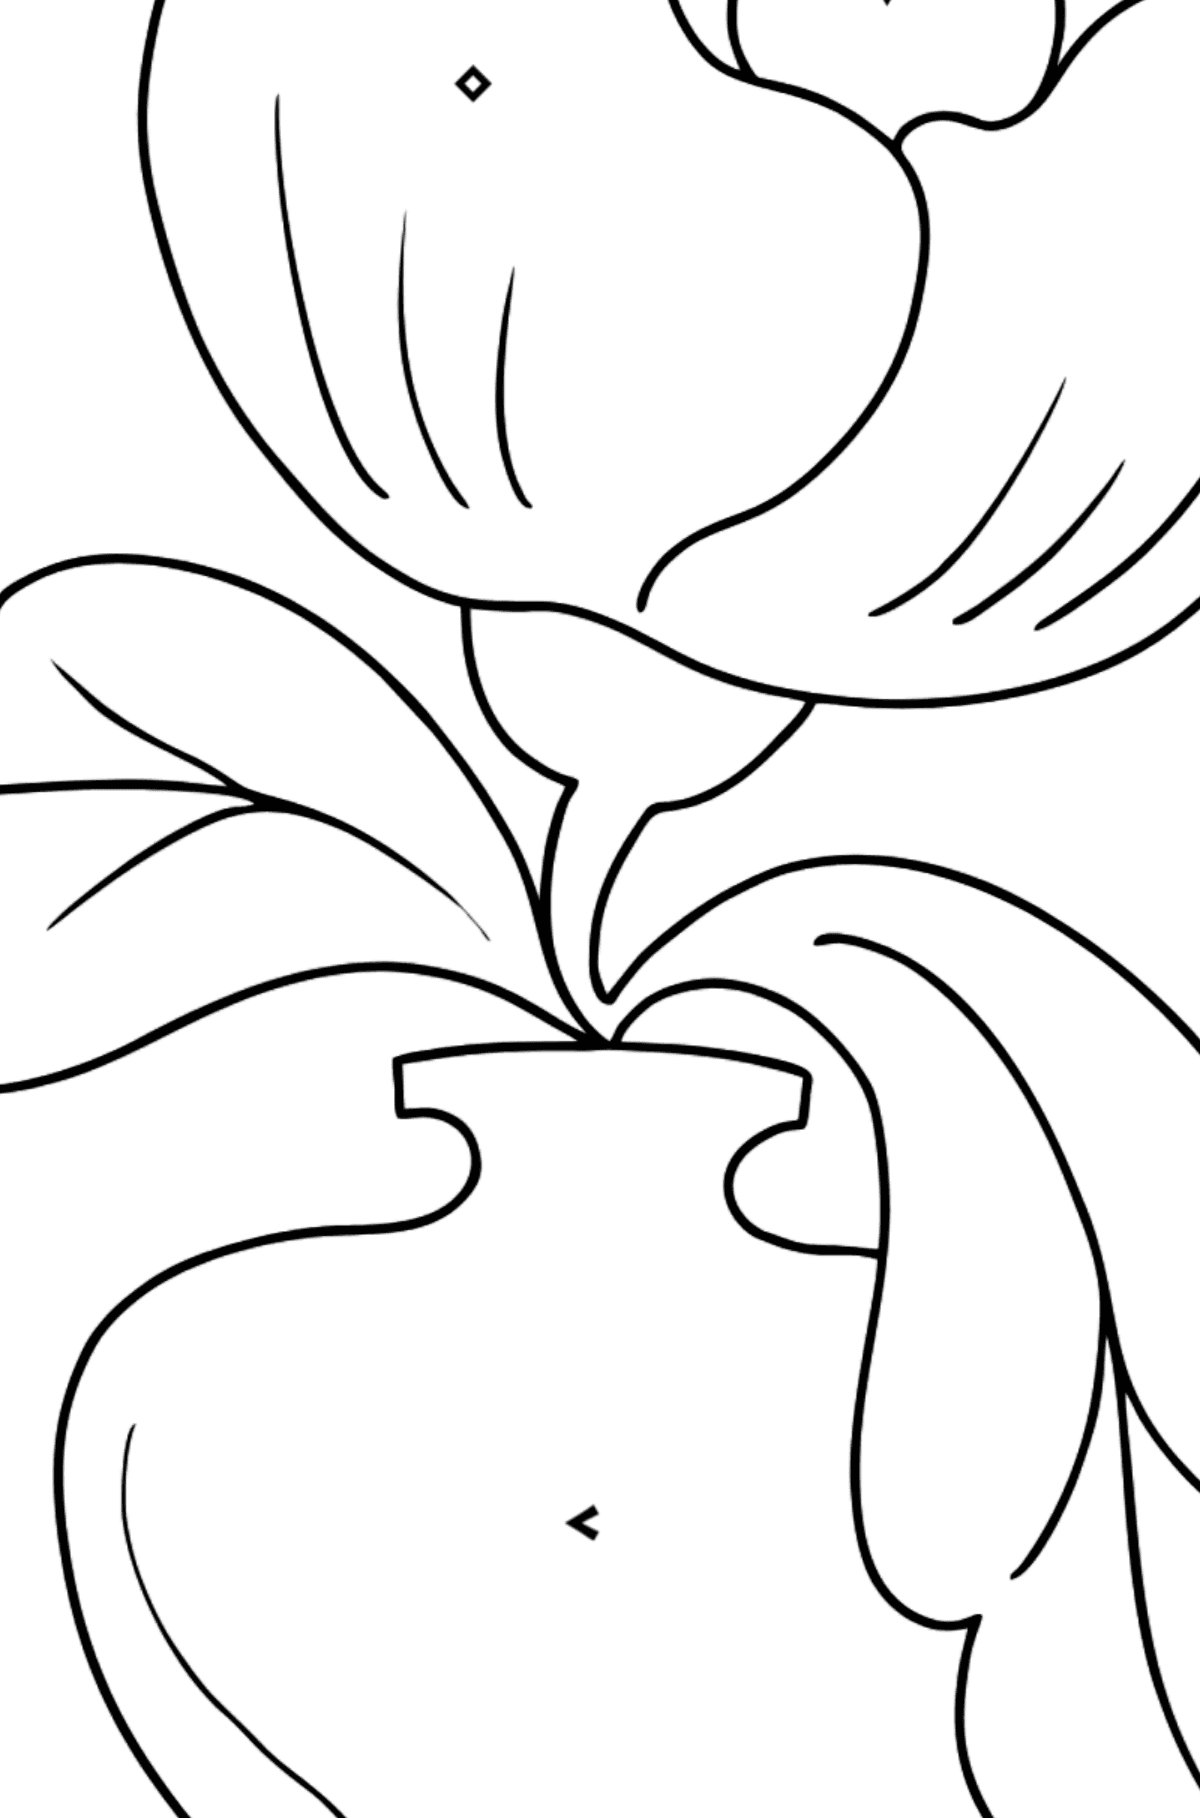 Coloring Page - flowers in a vase - Coloring by Symbols and Geometric Shapes for Kids